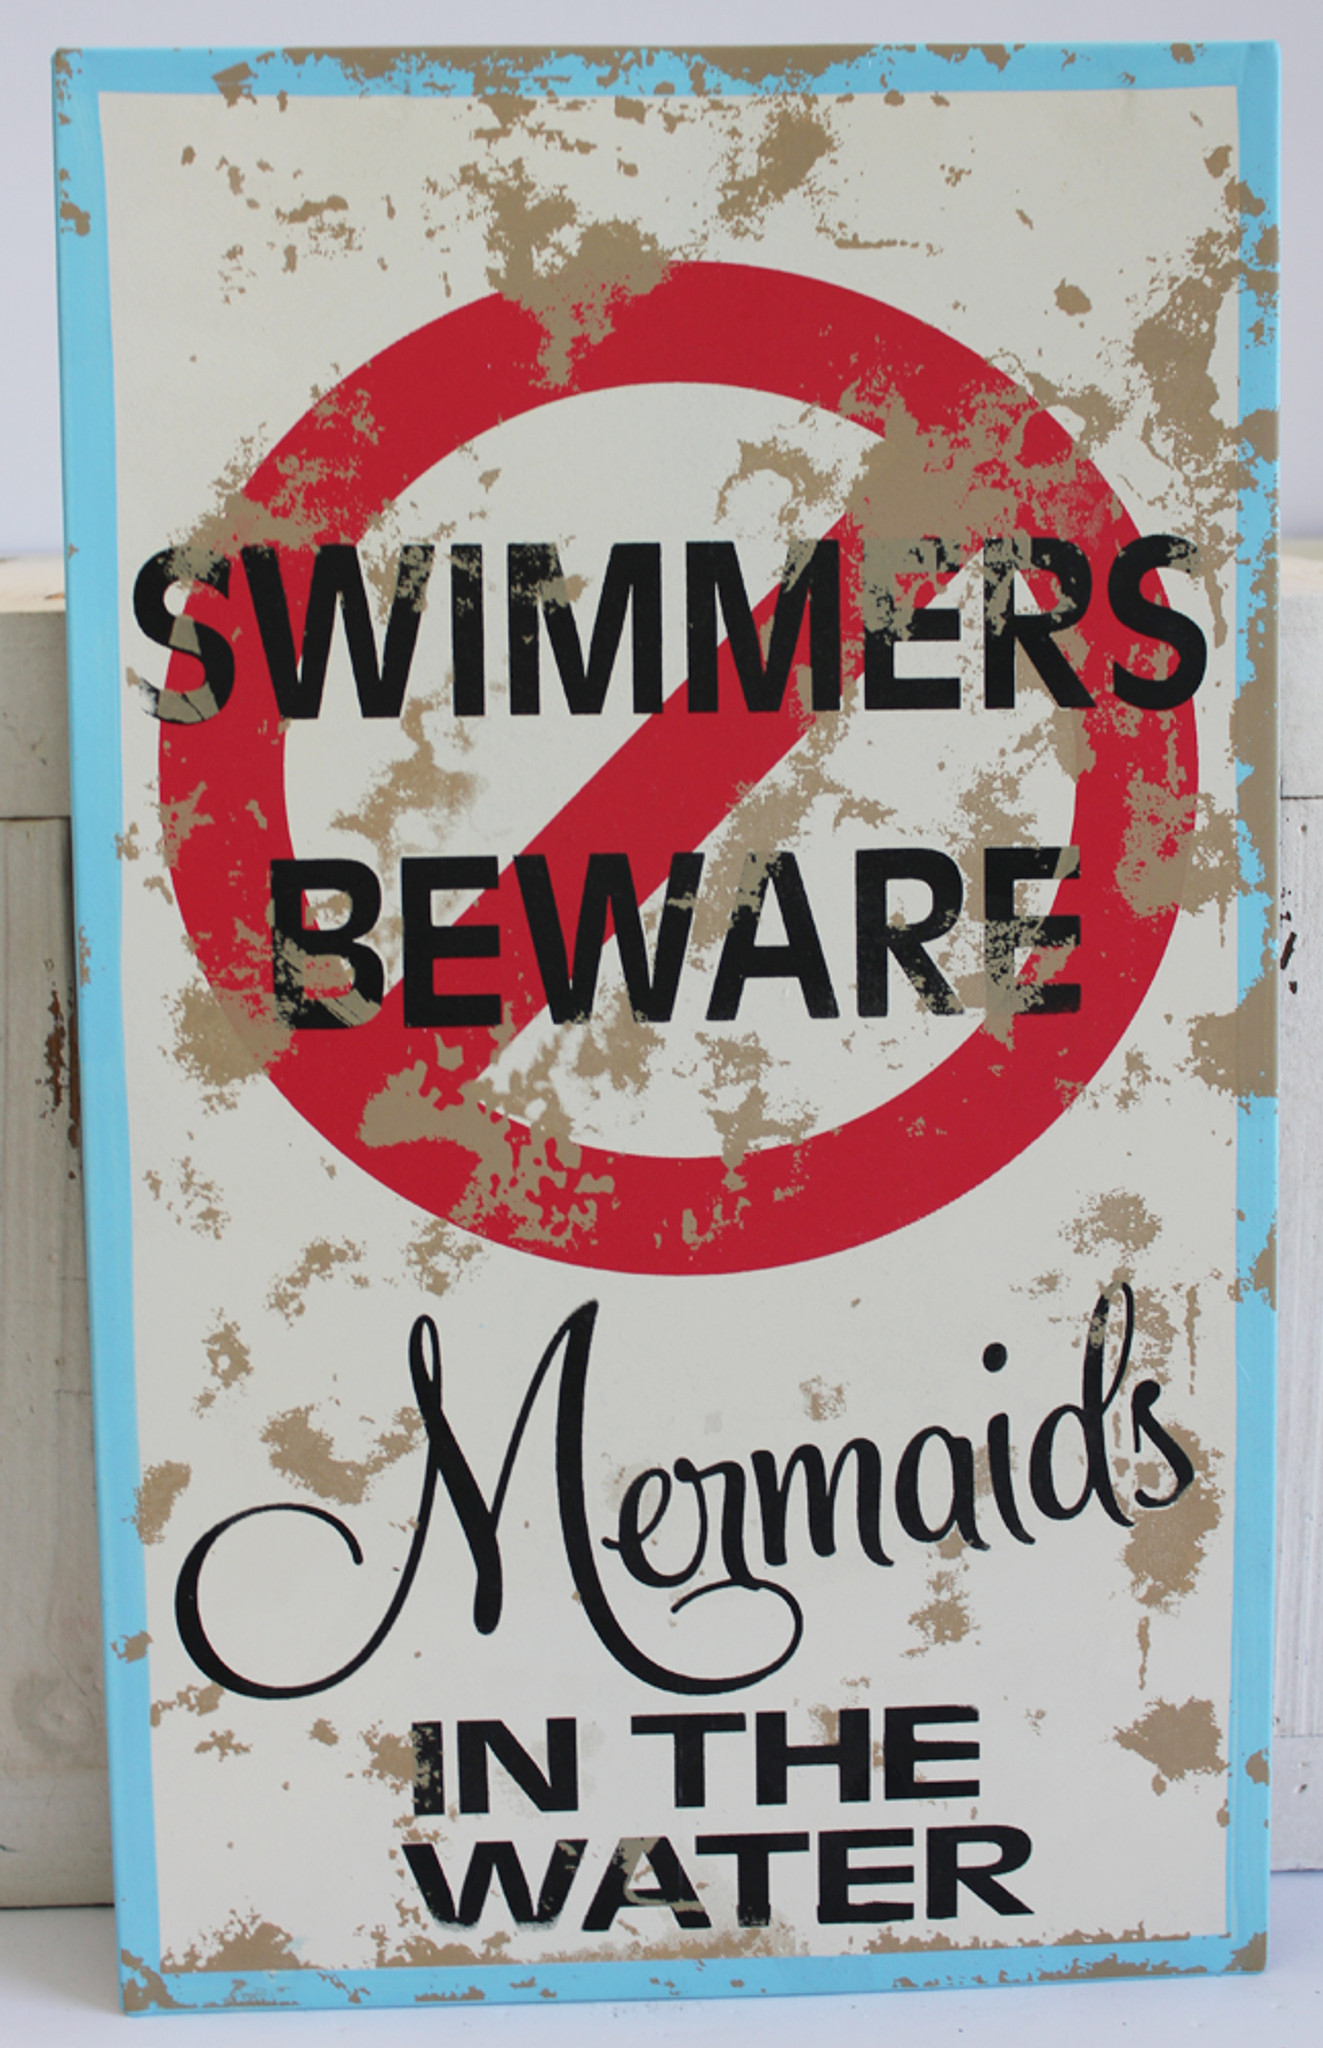 Beware the Mermaids by Carrie Talick